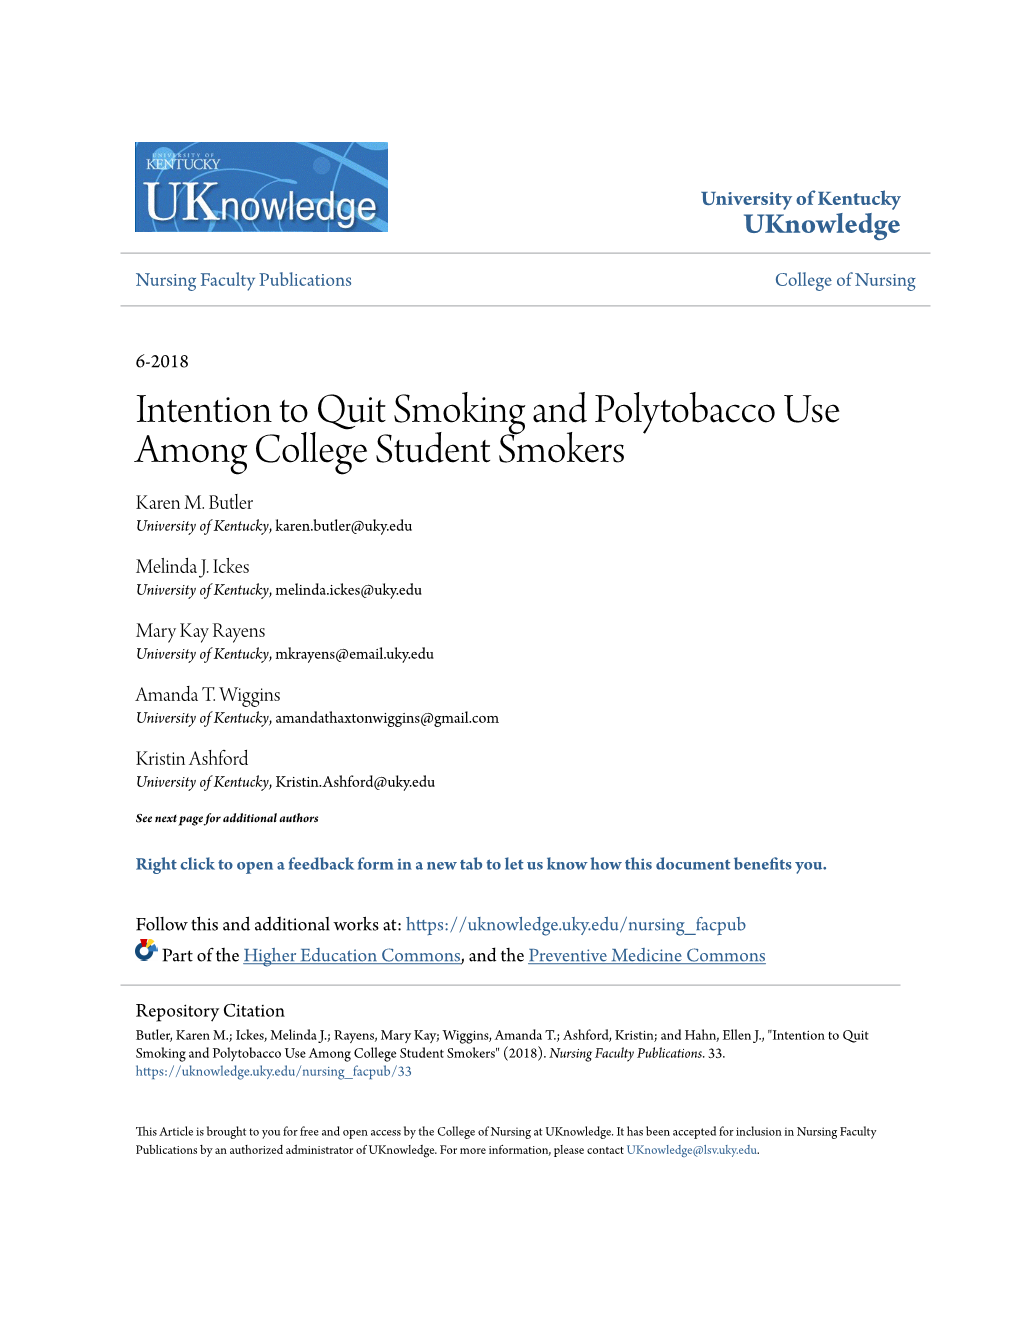 Intention to Quit Smoking and Polytobacco Use Among College Student Smokers Karen M